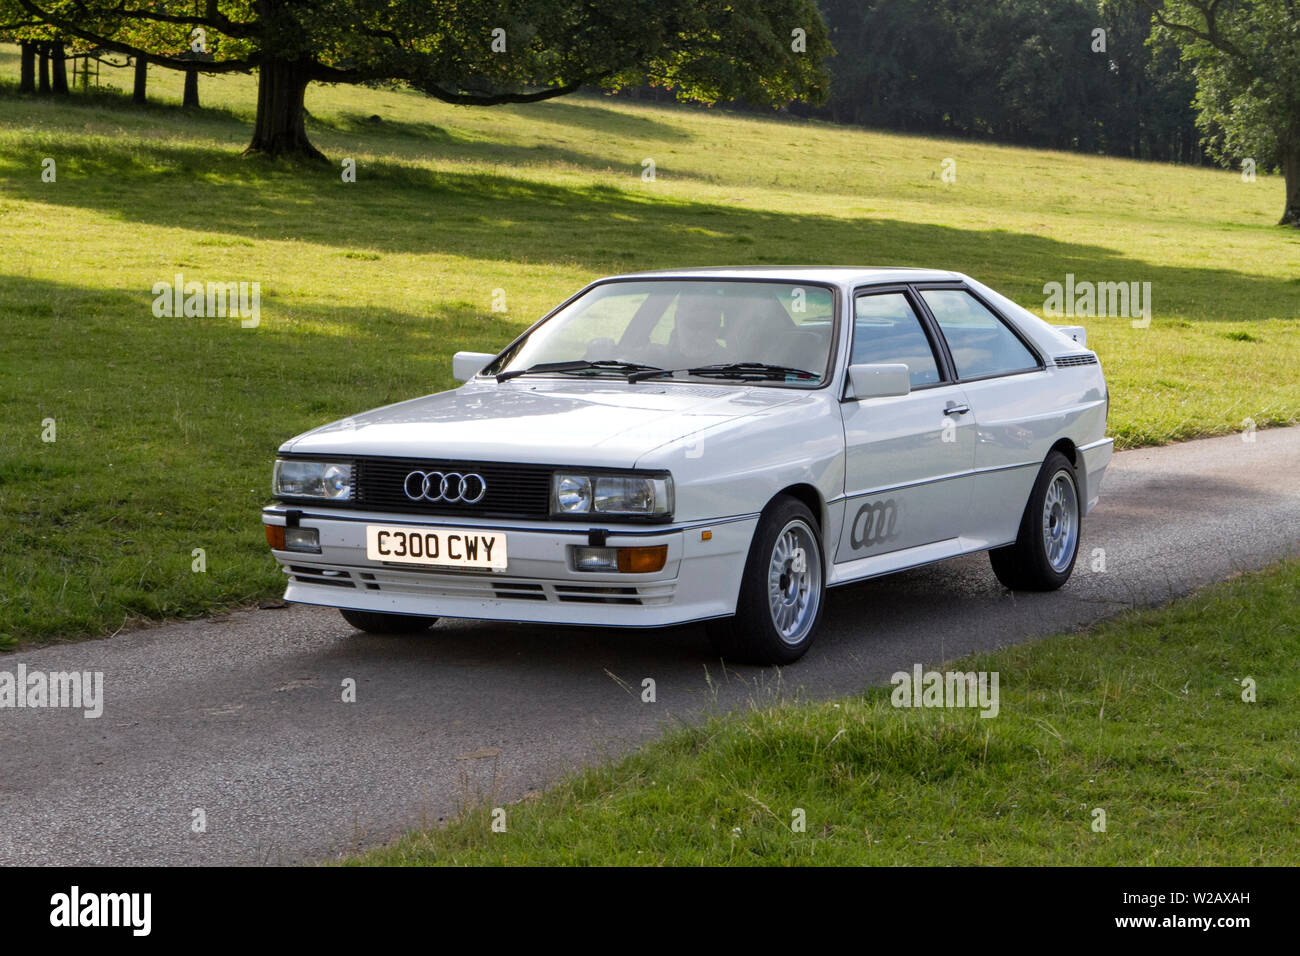 https://c8.alamy.com/comp/W2AXAH/c300cwy-audi-quattro-rhd-historics-vintage-motors-and-collectibles-2019-leighton-hall-transport-collection-of-cars-veteran-vehicles-of-yesteryear-W2AXAH.jpg